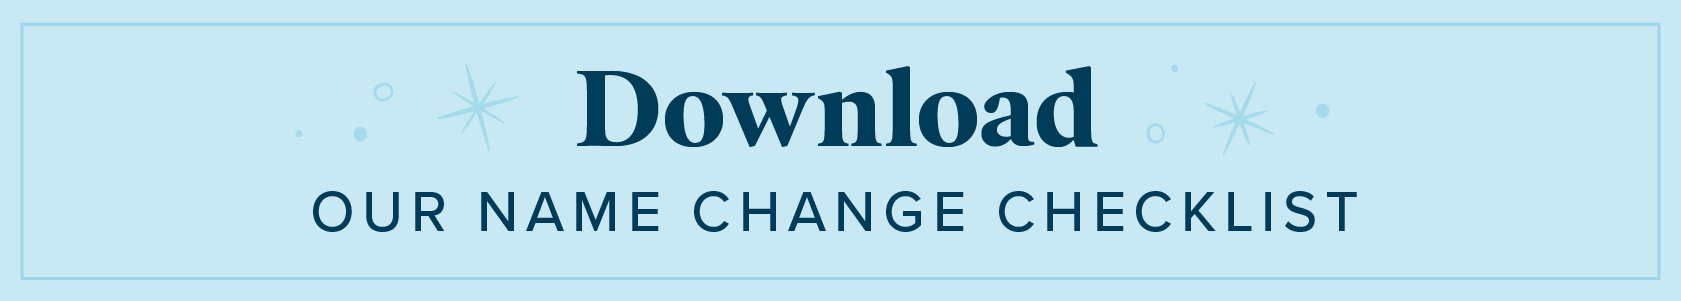 download-button-name-change